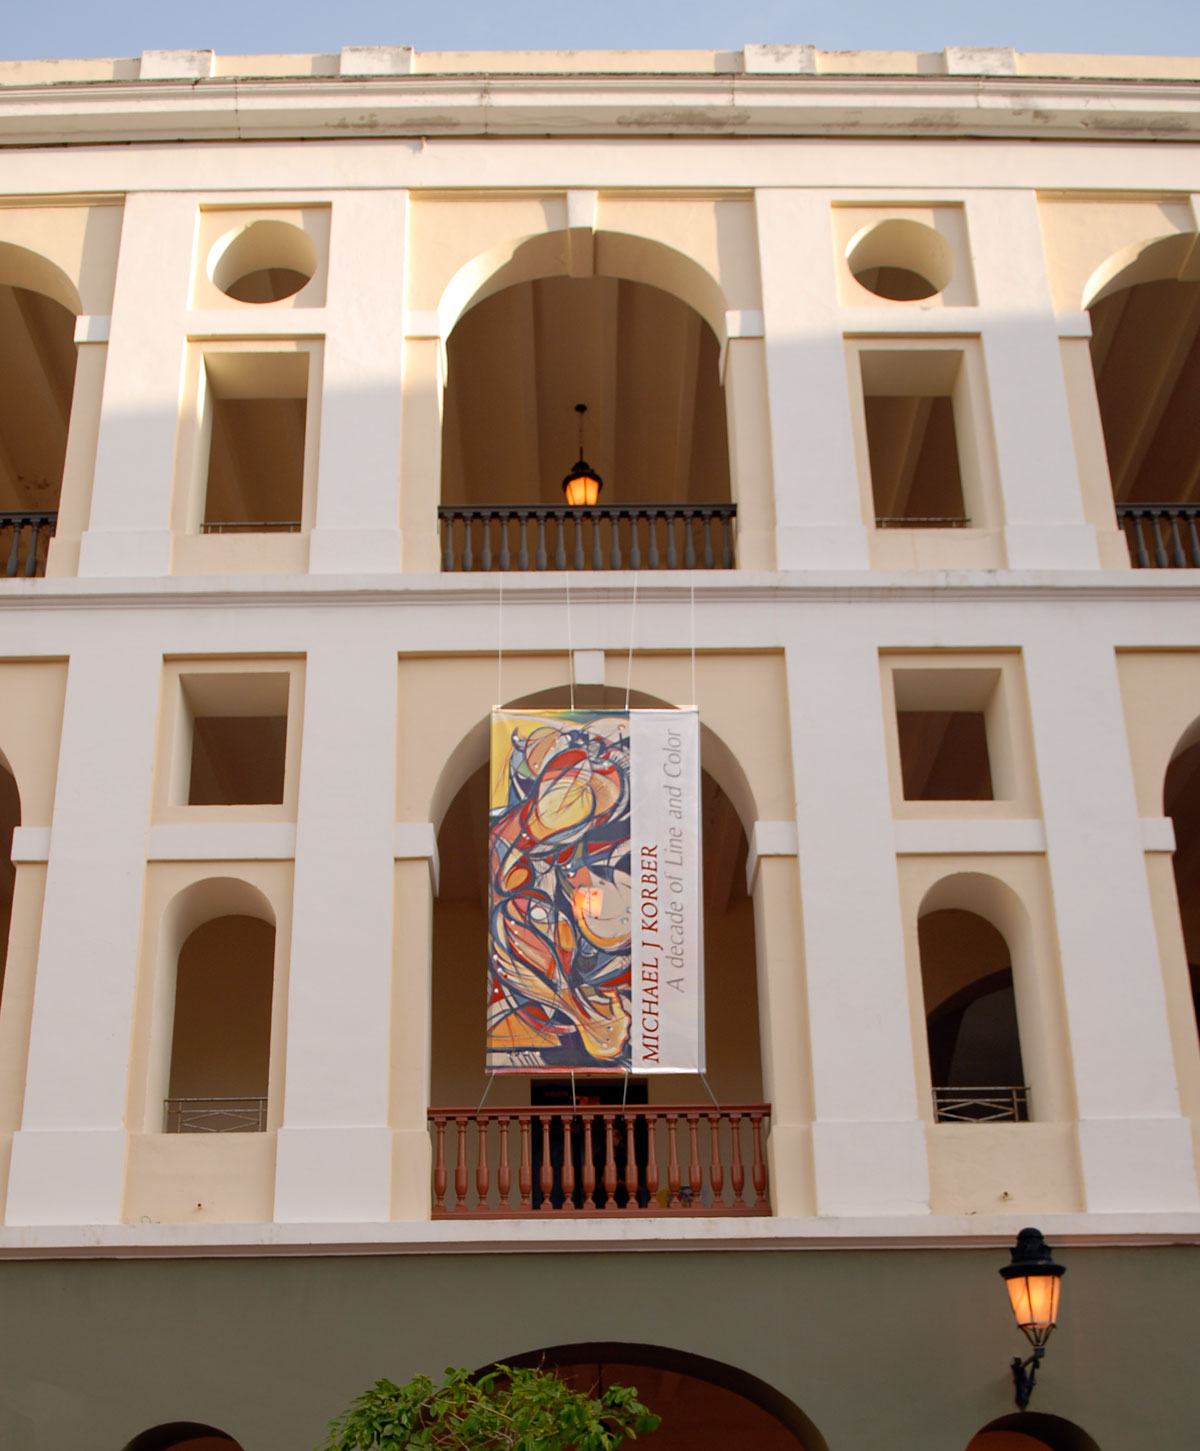 Photo of the Museum of the Americas in Old San Juan, Puerto Rico at the venue of artist and painter Michael J. Korber in his Art Retrospective Exhibit, titled - A decade of line and color, in 2007.